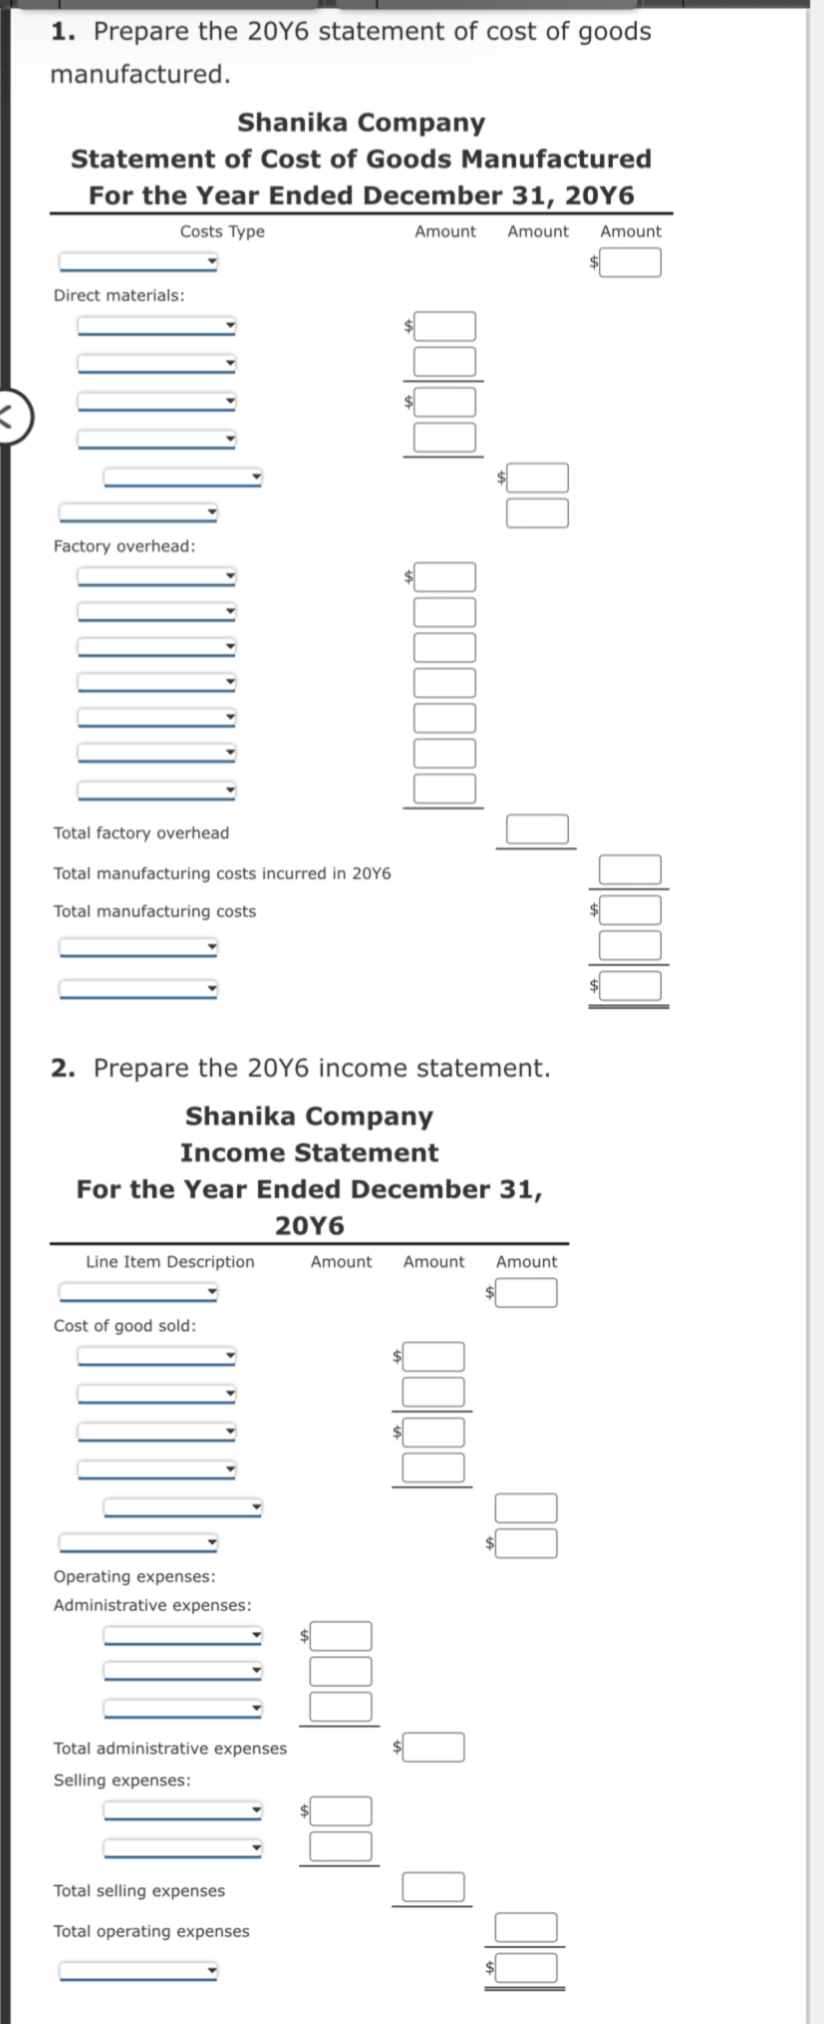 1. Prepare the 20Y6 statement of cost of goods
manufactured.
Shanika Company
Statement of Cost of Goods Manufactured
For the Year Ended December 31, 20Y6
Costs Type
Amount Amount Amount
Direct materials:
Factory overhead:
Total factory overhead
Total man
Total manufacturing costs
costs incurred in 20Y6
2. Prepare the 20Y6 income statement.
Shanika Company
Income Statement
For the Year Ended December 31,
20Y6
Line Item Description
Cost of good sold:
Operating expenses:
Administrative expenses:
Total administrative expenses
Selling expenses:
Total selling expenses
Total operating expenses
Amount Amount Amount